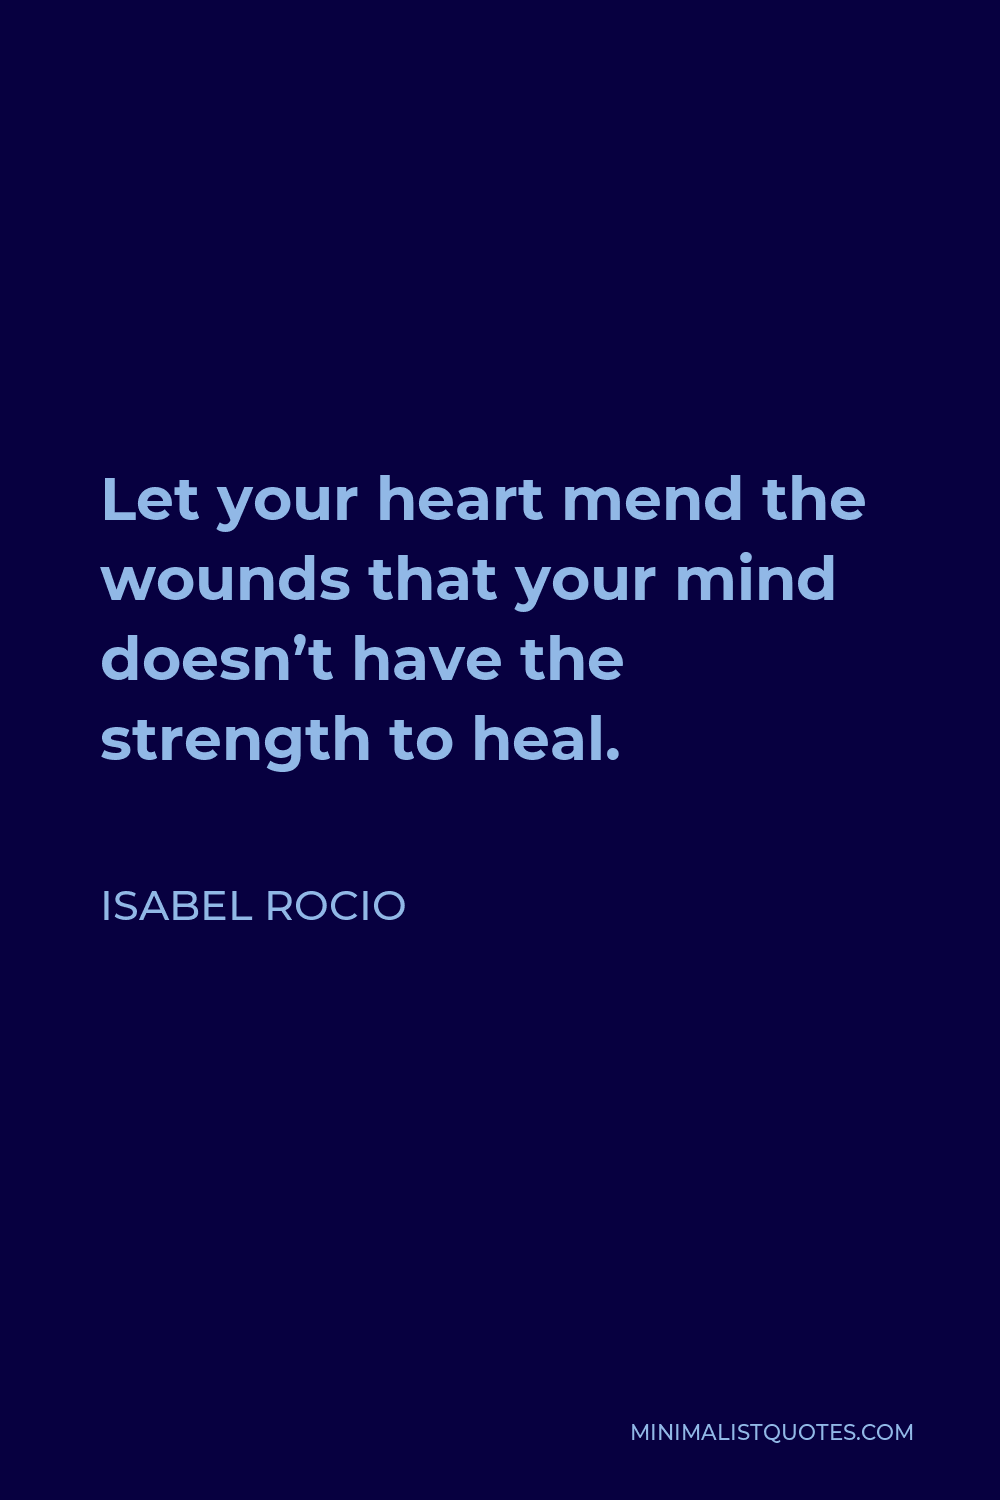 Isabel Rocio Quote - Let your heart mend the wounds that your mind doesn’t have the strength to heal.